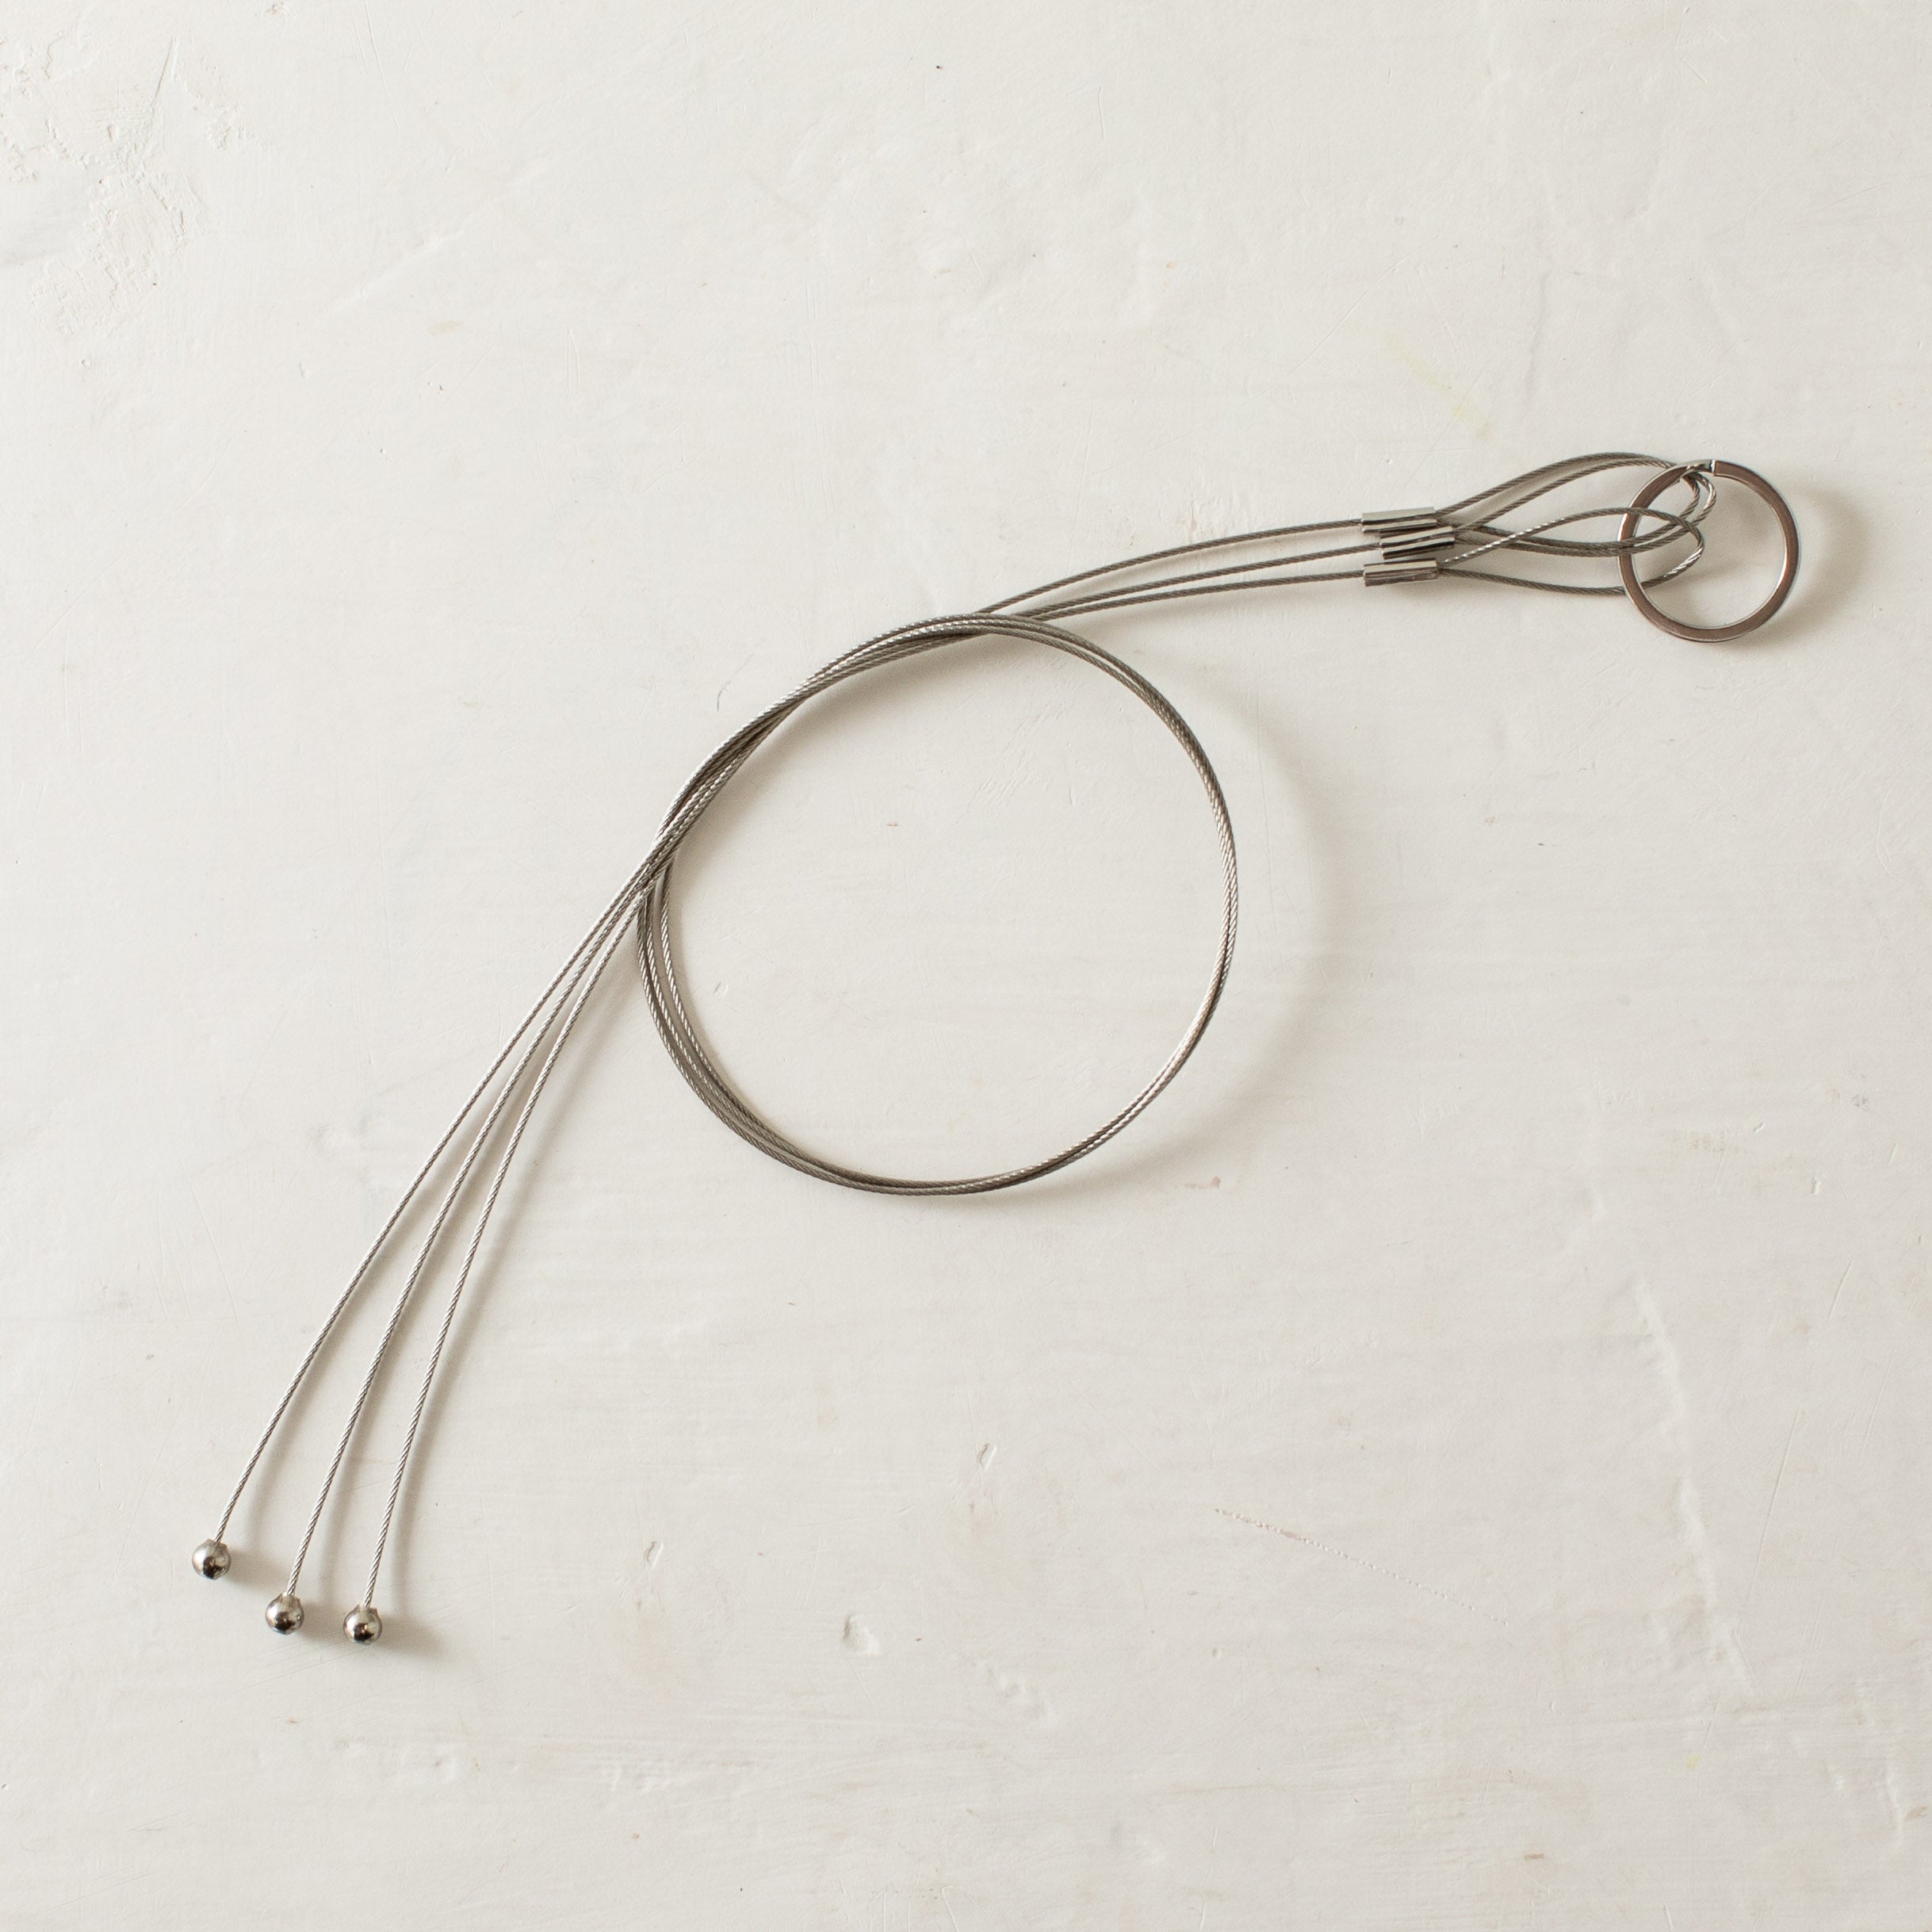 Stainless Steel Cord Set